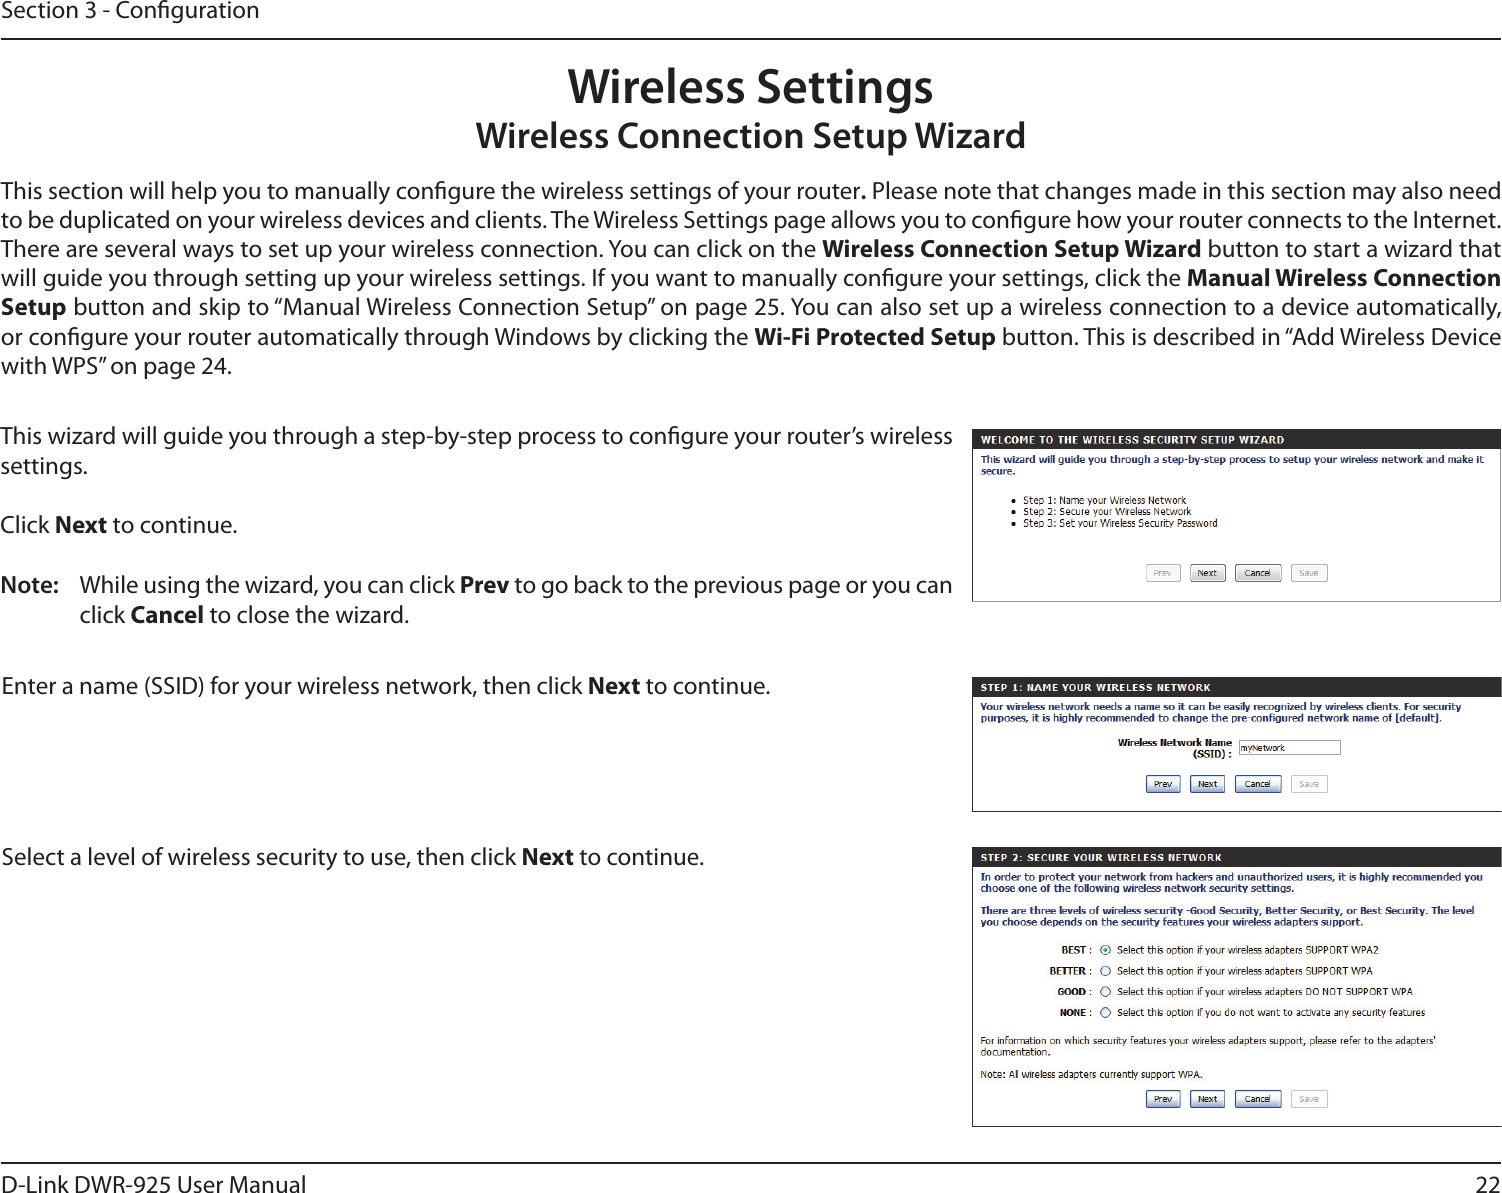 22D-Link DWR-925 User ManualSection 3 - CongurationWireless SettingsWireless Connection Setup WizardThis section will help you to manually congure the wireless settings of your router. Please note that changes made in this section may also need to be duplicated on your wireless devices and clients. The Wireless Settings page allows you to congure how your router connects to the Internet. There are several ways to set up your wireless connection. You can click on the Wireless Connection Setup Wizard button to start a wizard that will guide you through setting up your wireless settings. If you want to manually congure your settings, click the Manual Wireless Connection Setup button and skip to “Manual Wireless Connection Setup” on page 25. You can also set up a wireless connection to a device automatically, or congure your router automatically through Windows by clicking the Wi-Fi Protected Setup button. This is described in “Add Wireless Device with WPS” on page 24.This wizard will guide you through a step-by-step process to congure your router’s wireless settings.Click Next to continue.Note:  While using the wizard, you can click Prev to go back to the previous page or you can click Cancel to close the wizard.Enter a name (SSID) for your wireless network, then click Next to continue.Select a level of wireless security to use, then click Next to continue.